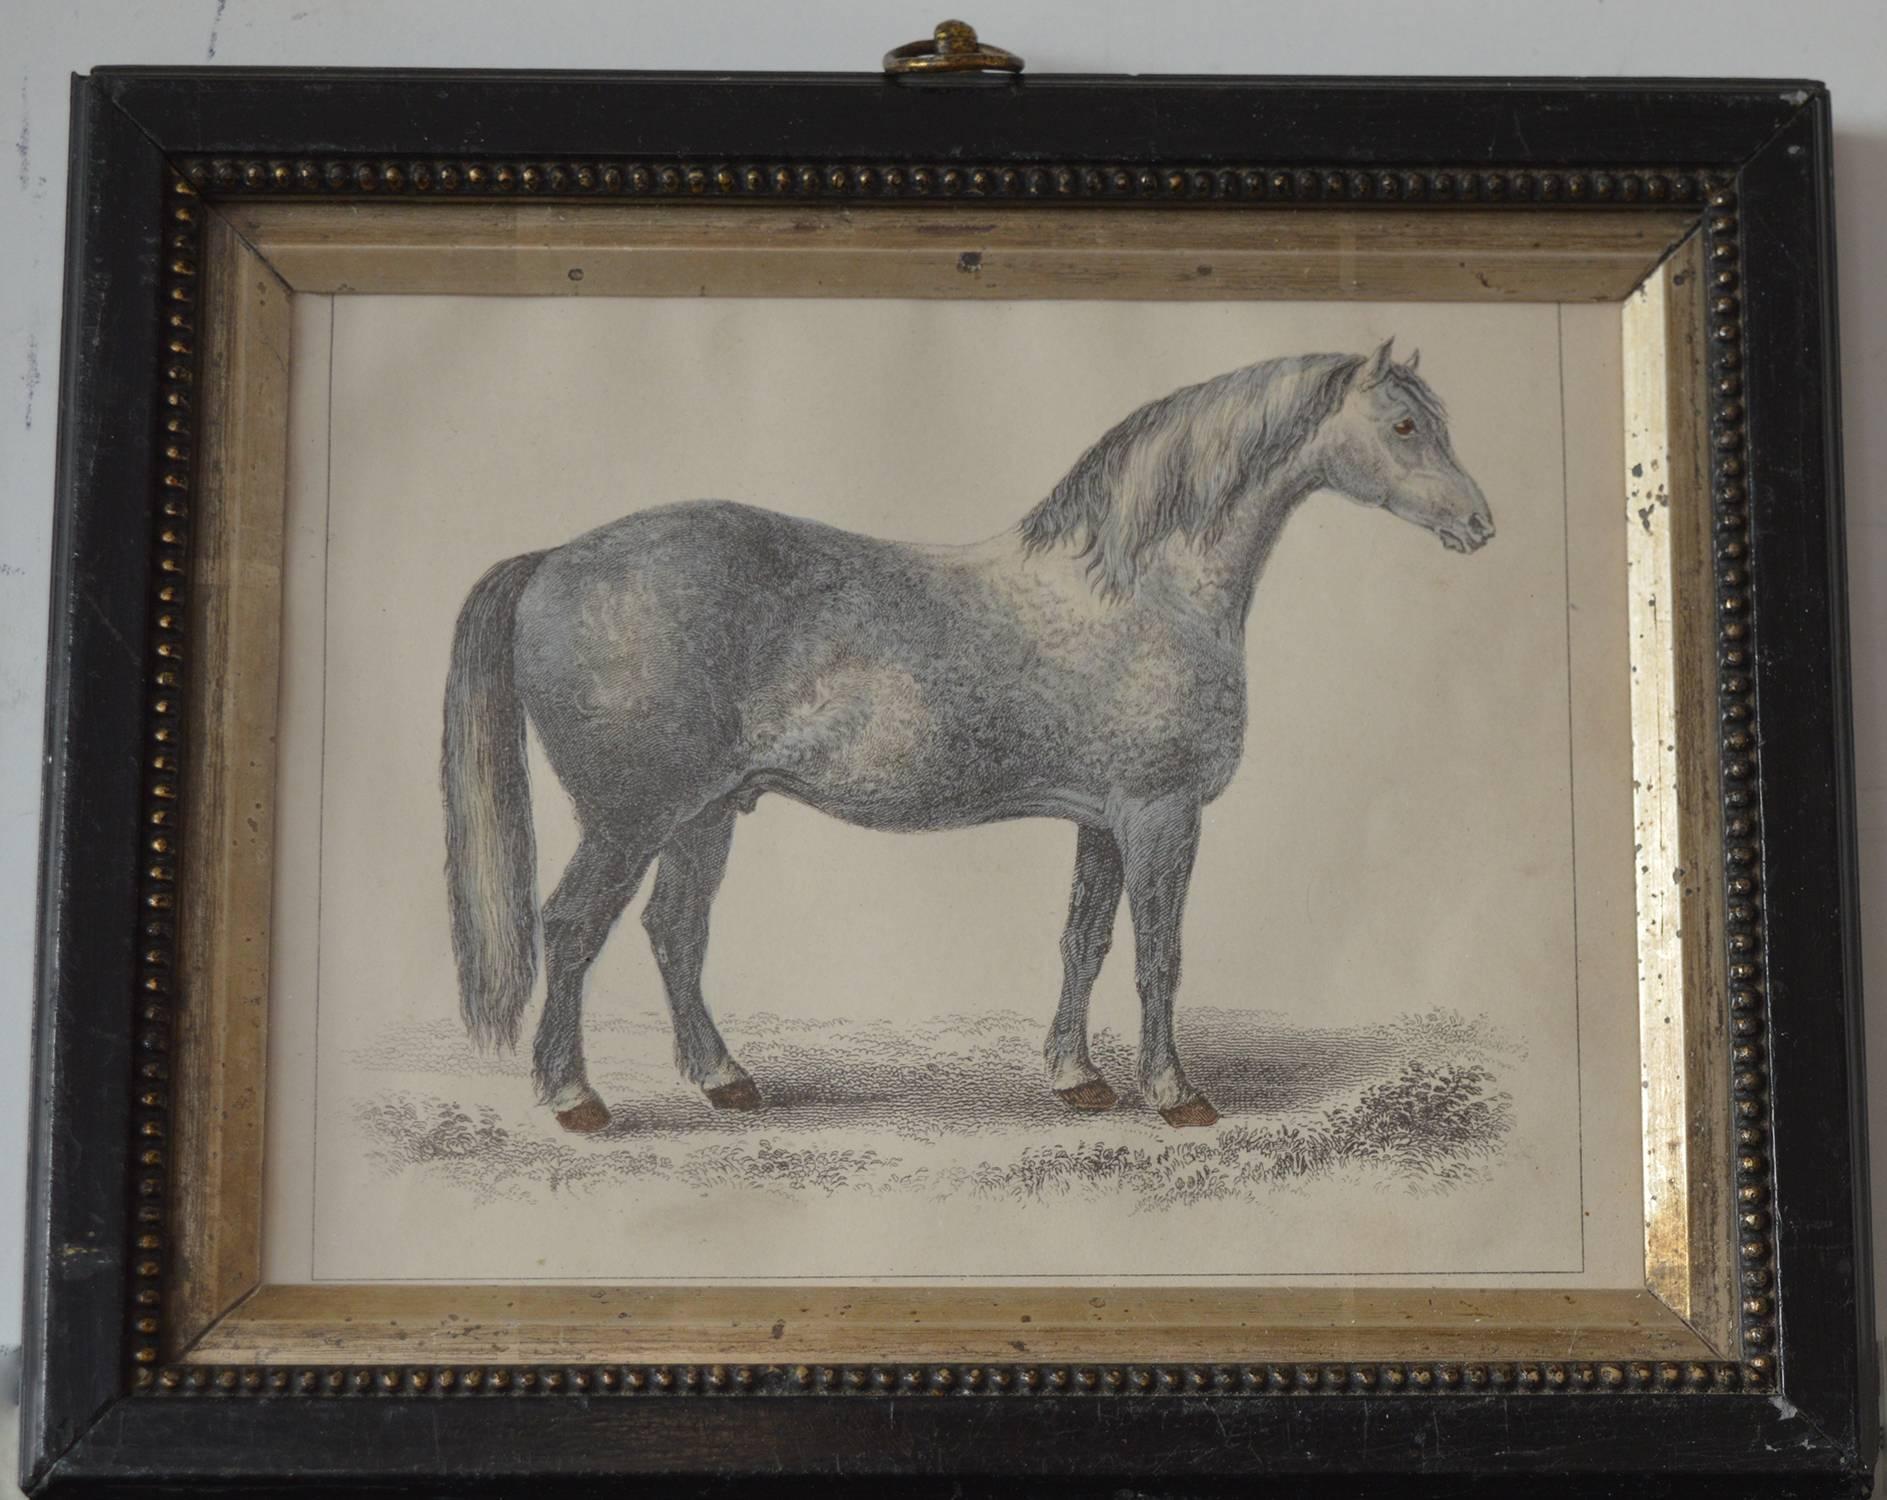 Great image of a horse.

Hand coloured lithograph.

Original colour.

Published by Fullarton, London and Edinburgh 1847.

Presented in a 19th century painted gesso frame with gilt slip.

The measurement given below is the frame size.
 